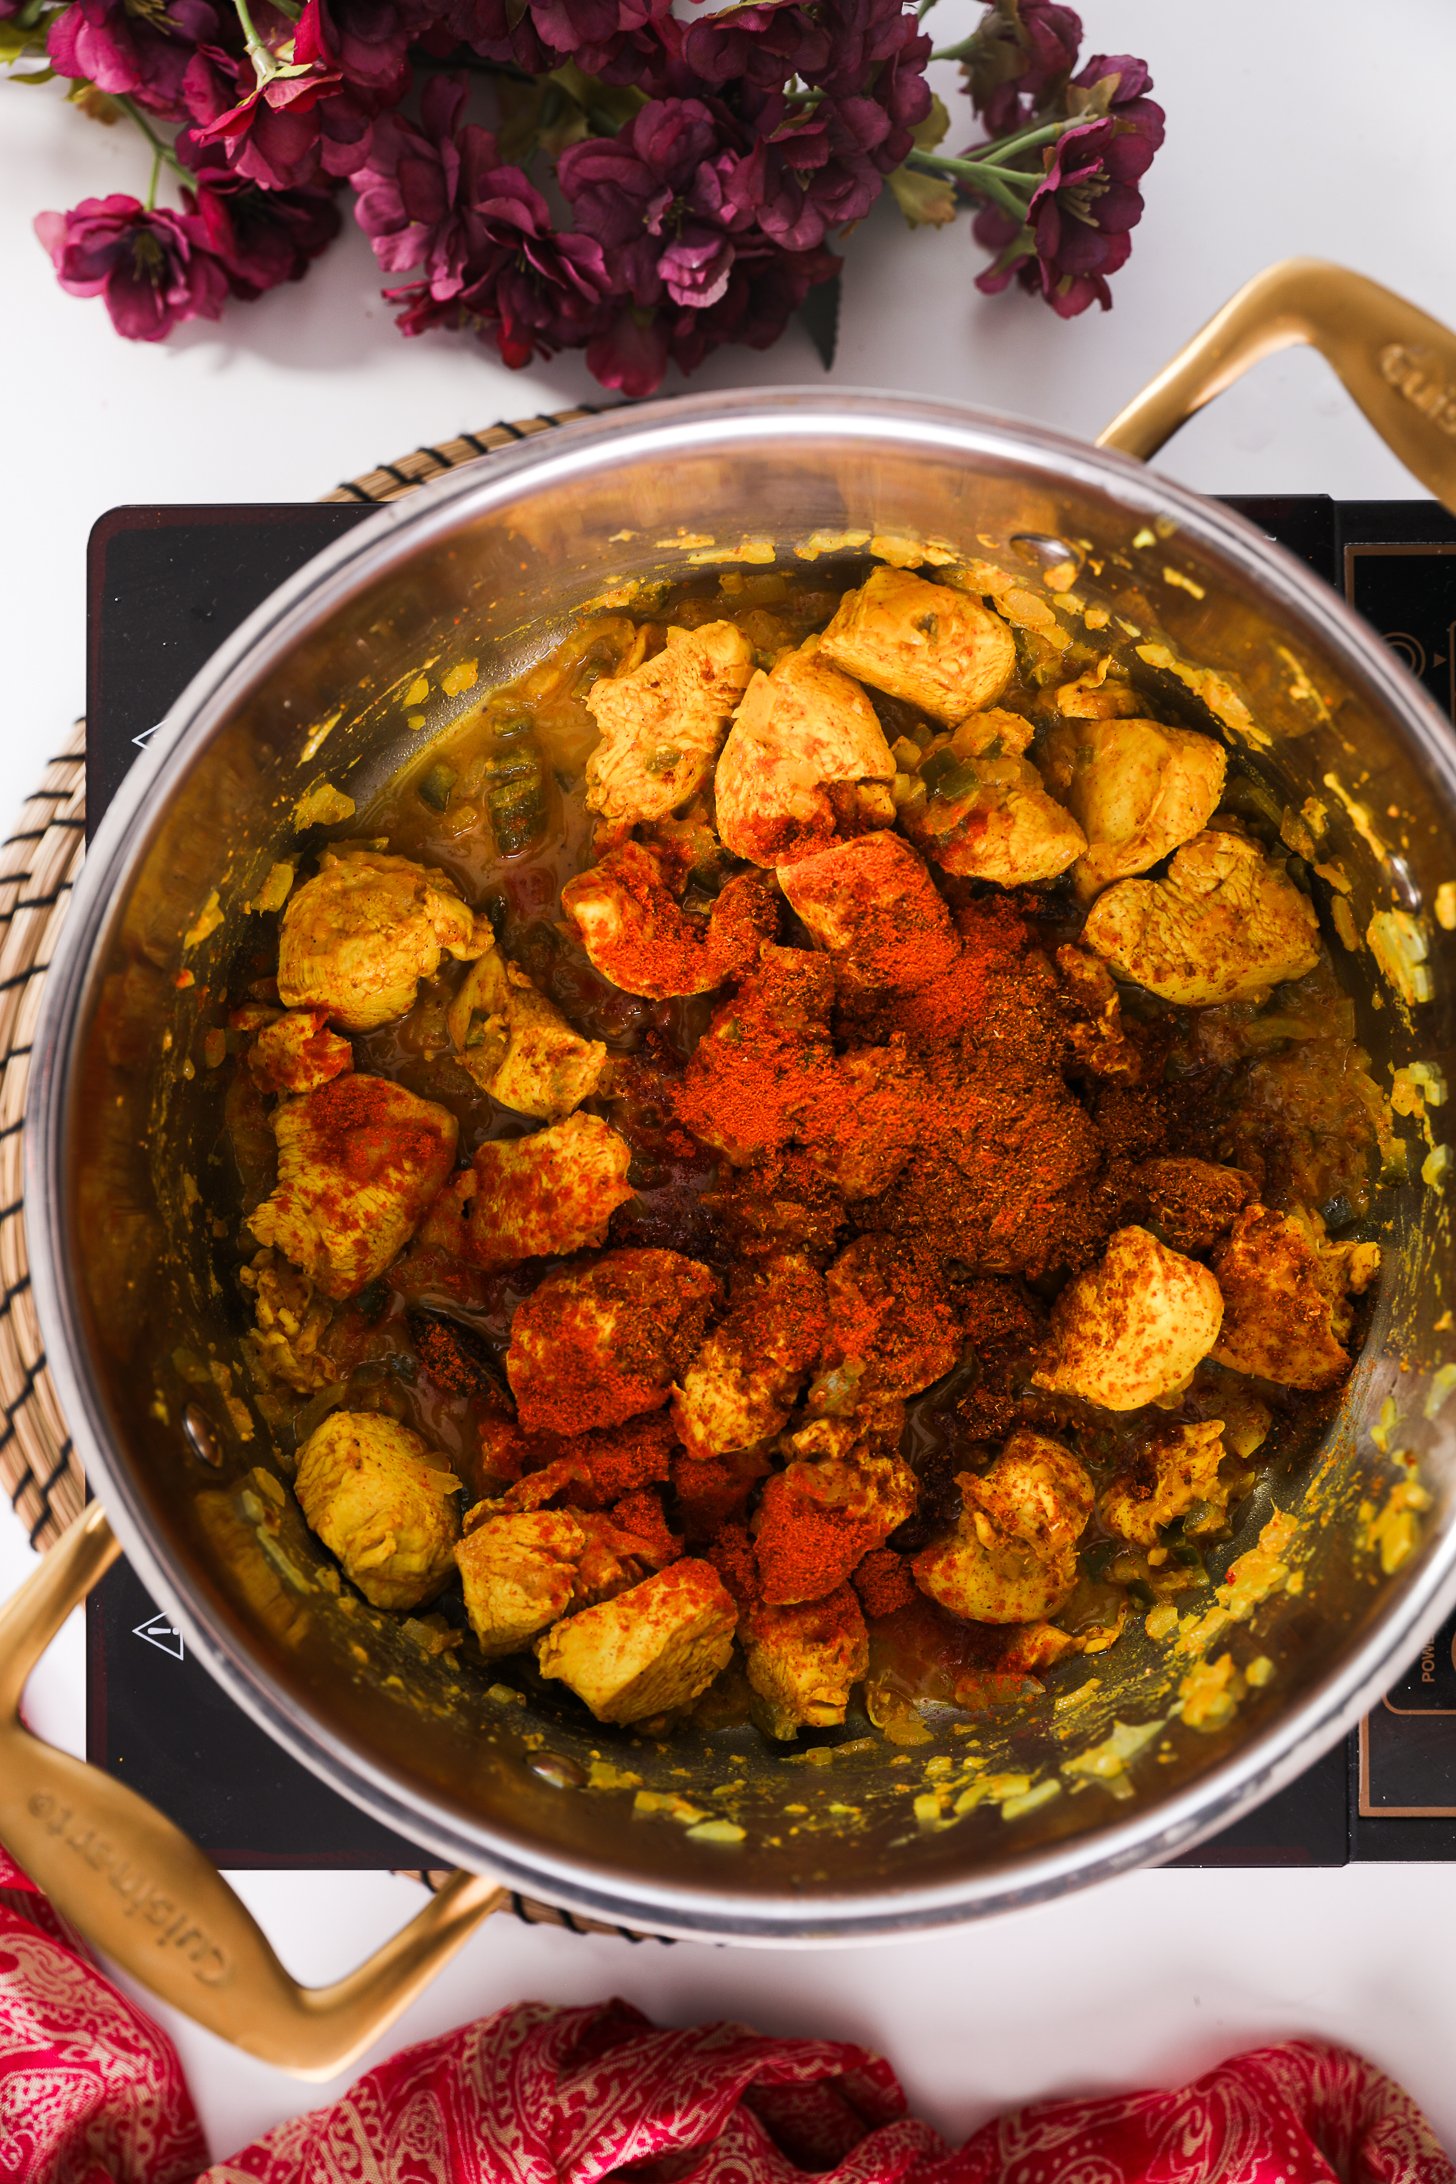 Pot on a portable surface, holding marinated cubes of chicken breast sprinkled with red spices.